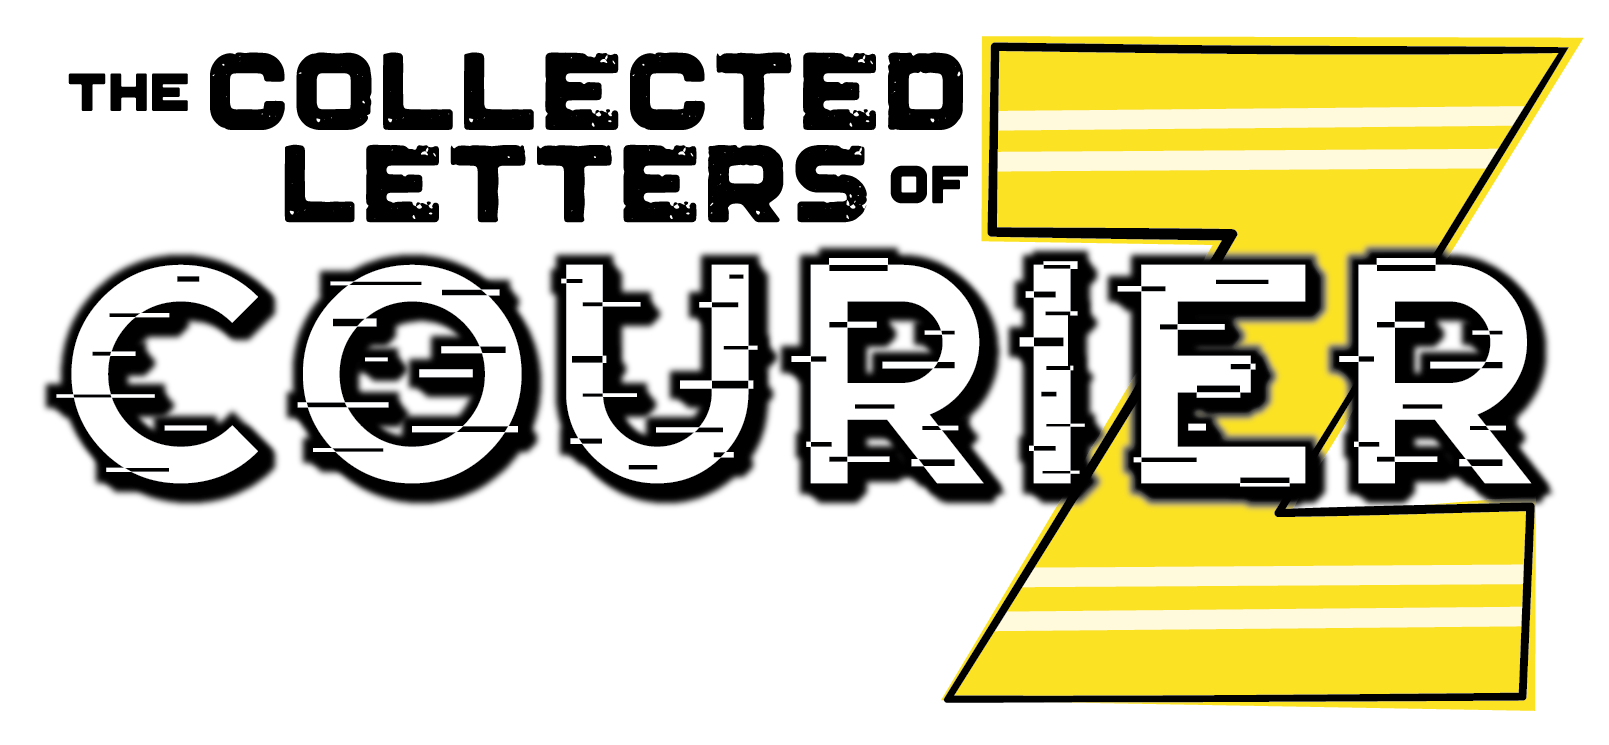 The Collected Letters of Courier Z logo